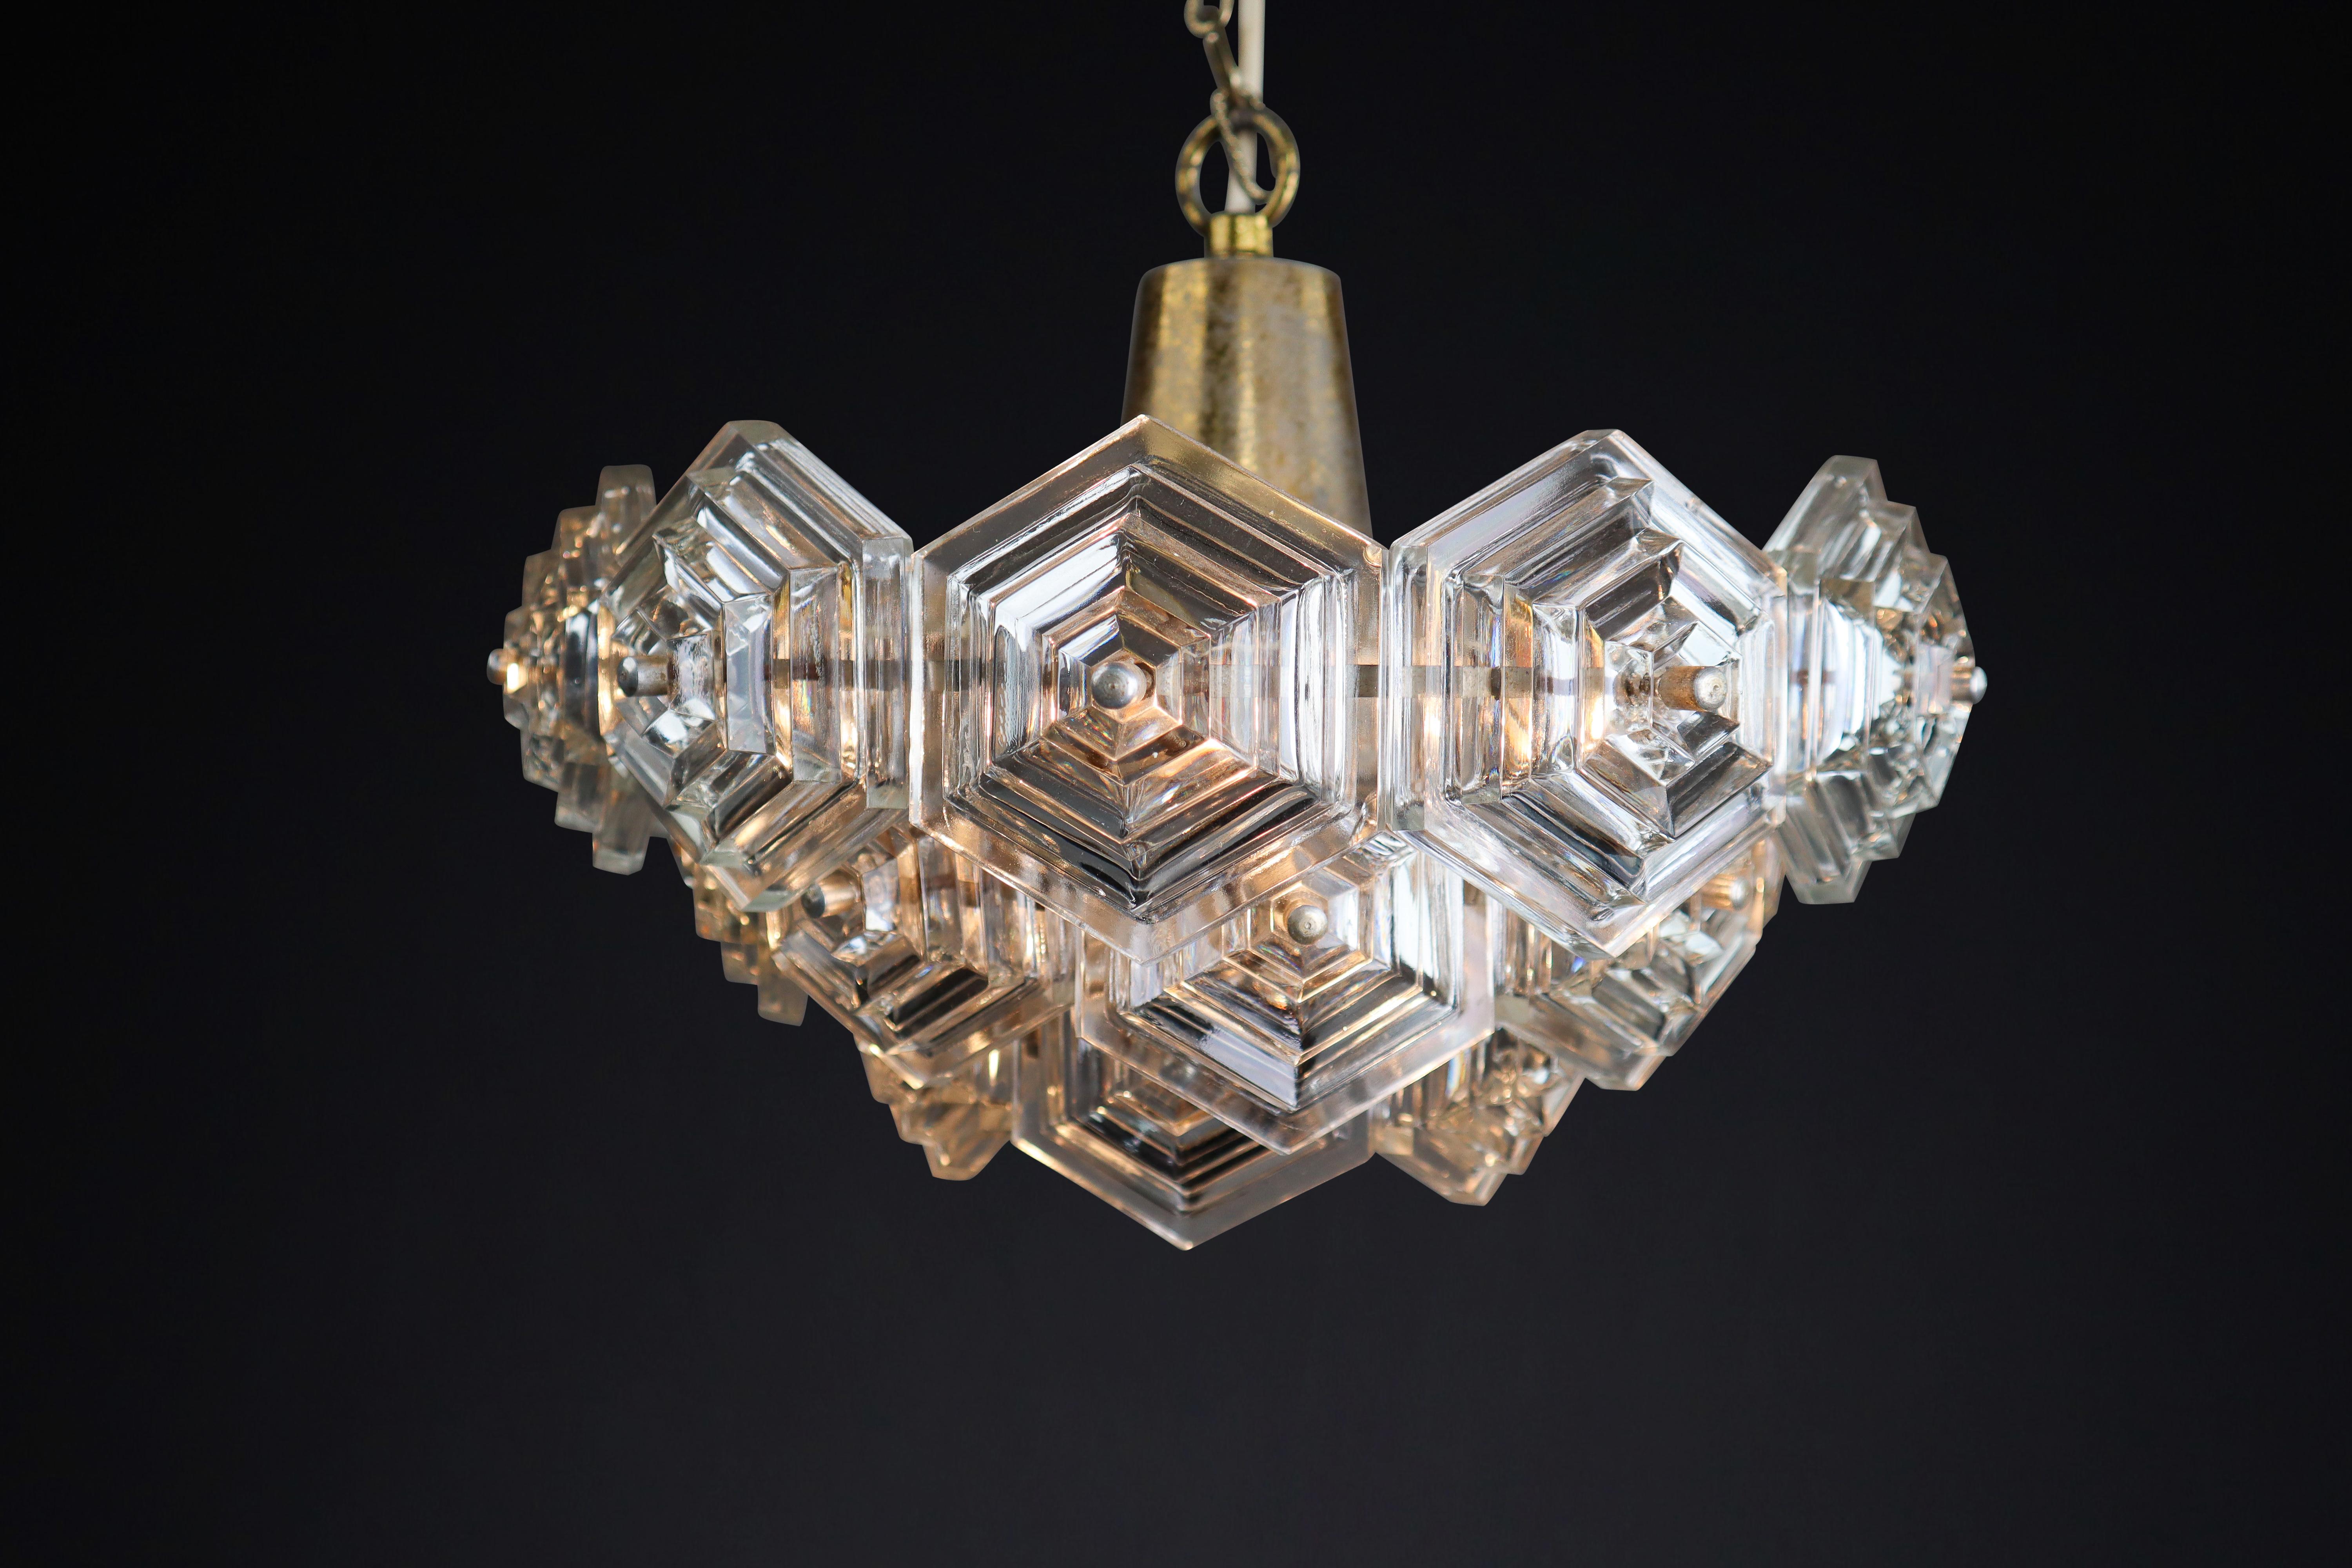 Patinated Brass and Glass Chandelier by Kamenický Šenov Czechoslovakia 1960s

This is a beautiful patinated brass chandelier from Kamenický Šenov, Czechoslovakia, in the 1960s. It is in excellent vintage condition and fully functional with porcelain